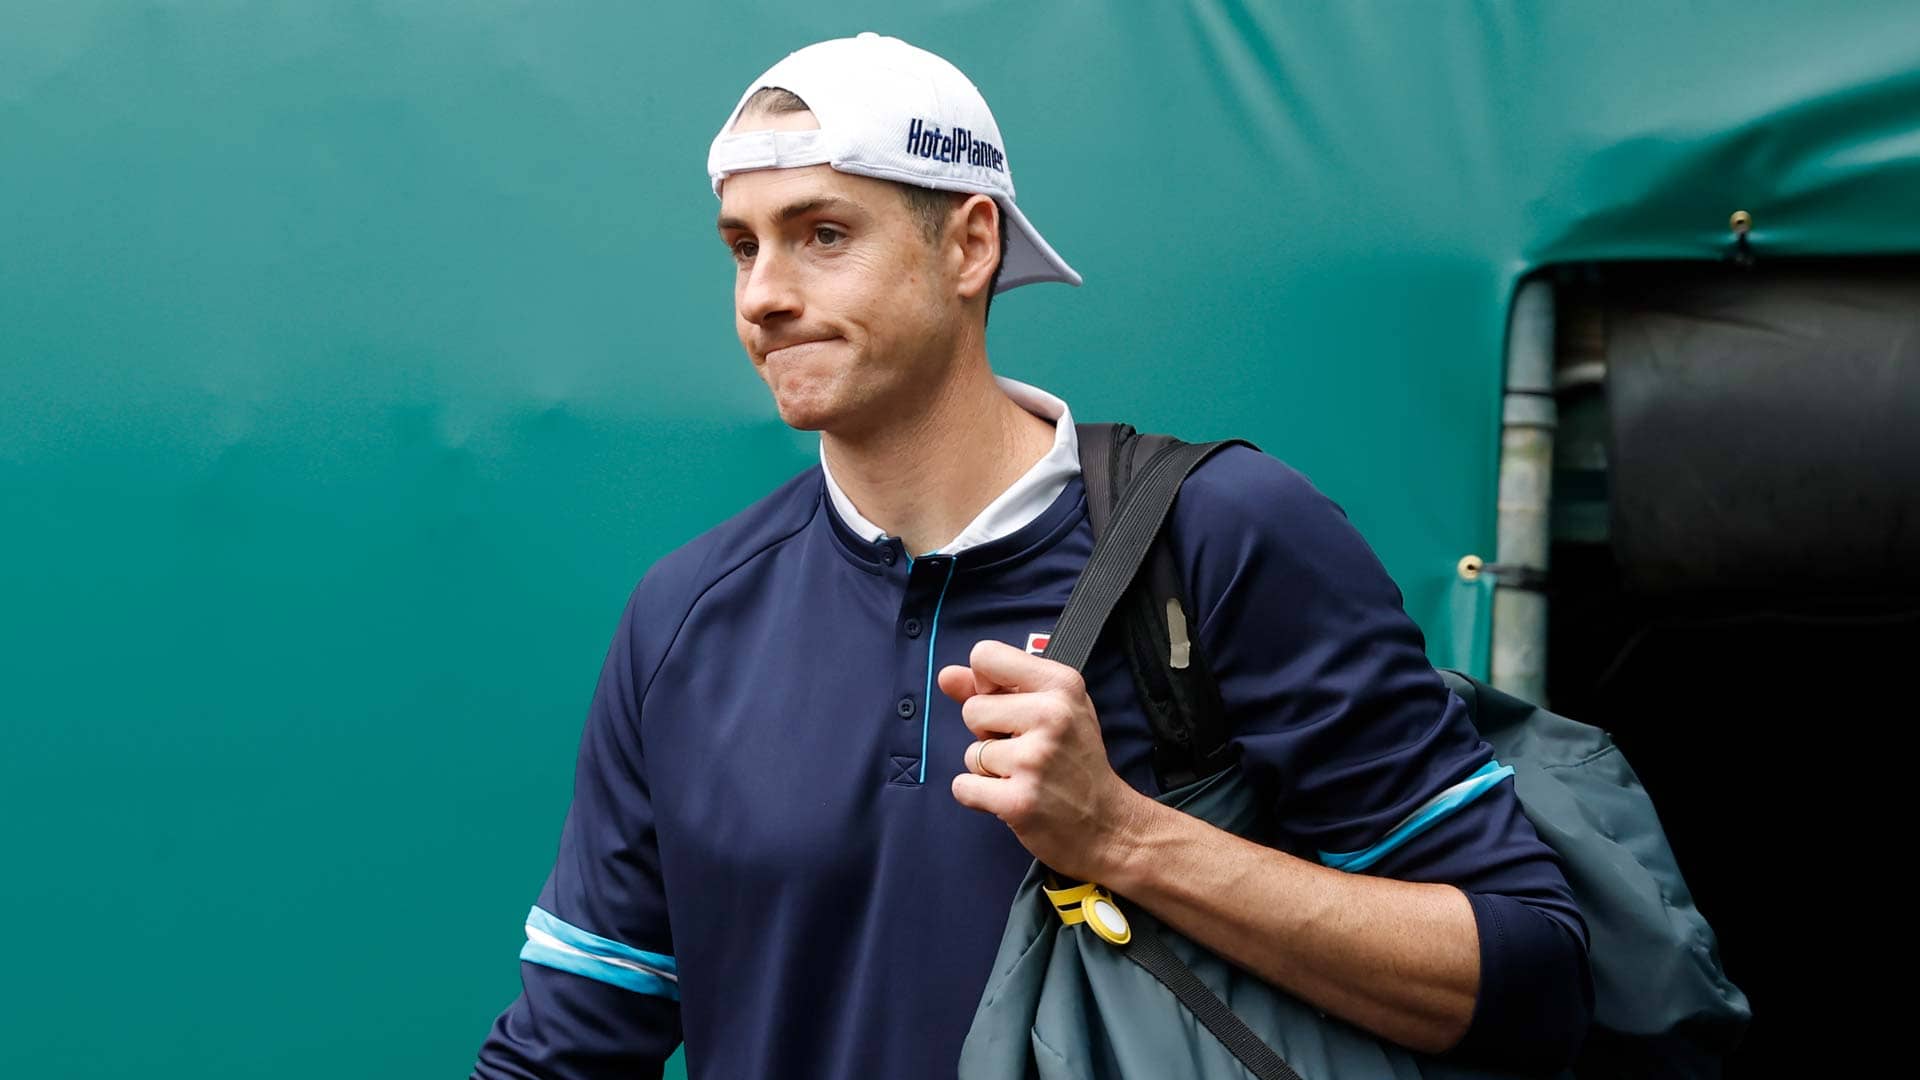 Dallas resident John Isner is the fourth seed in Houston.